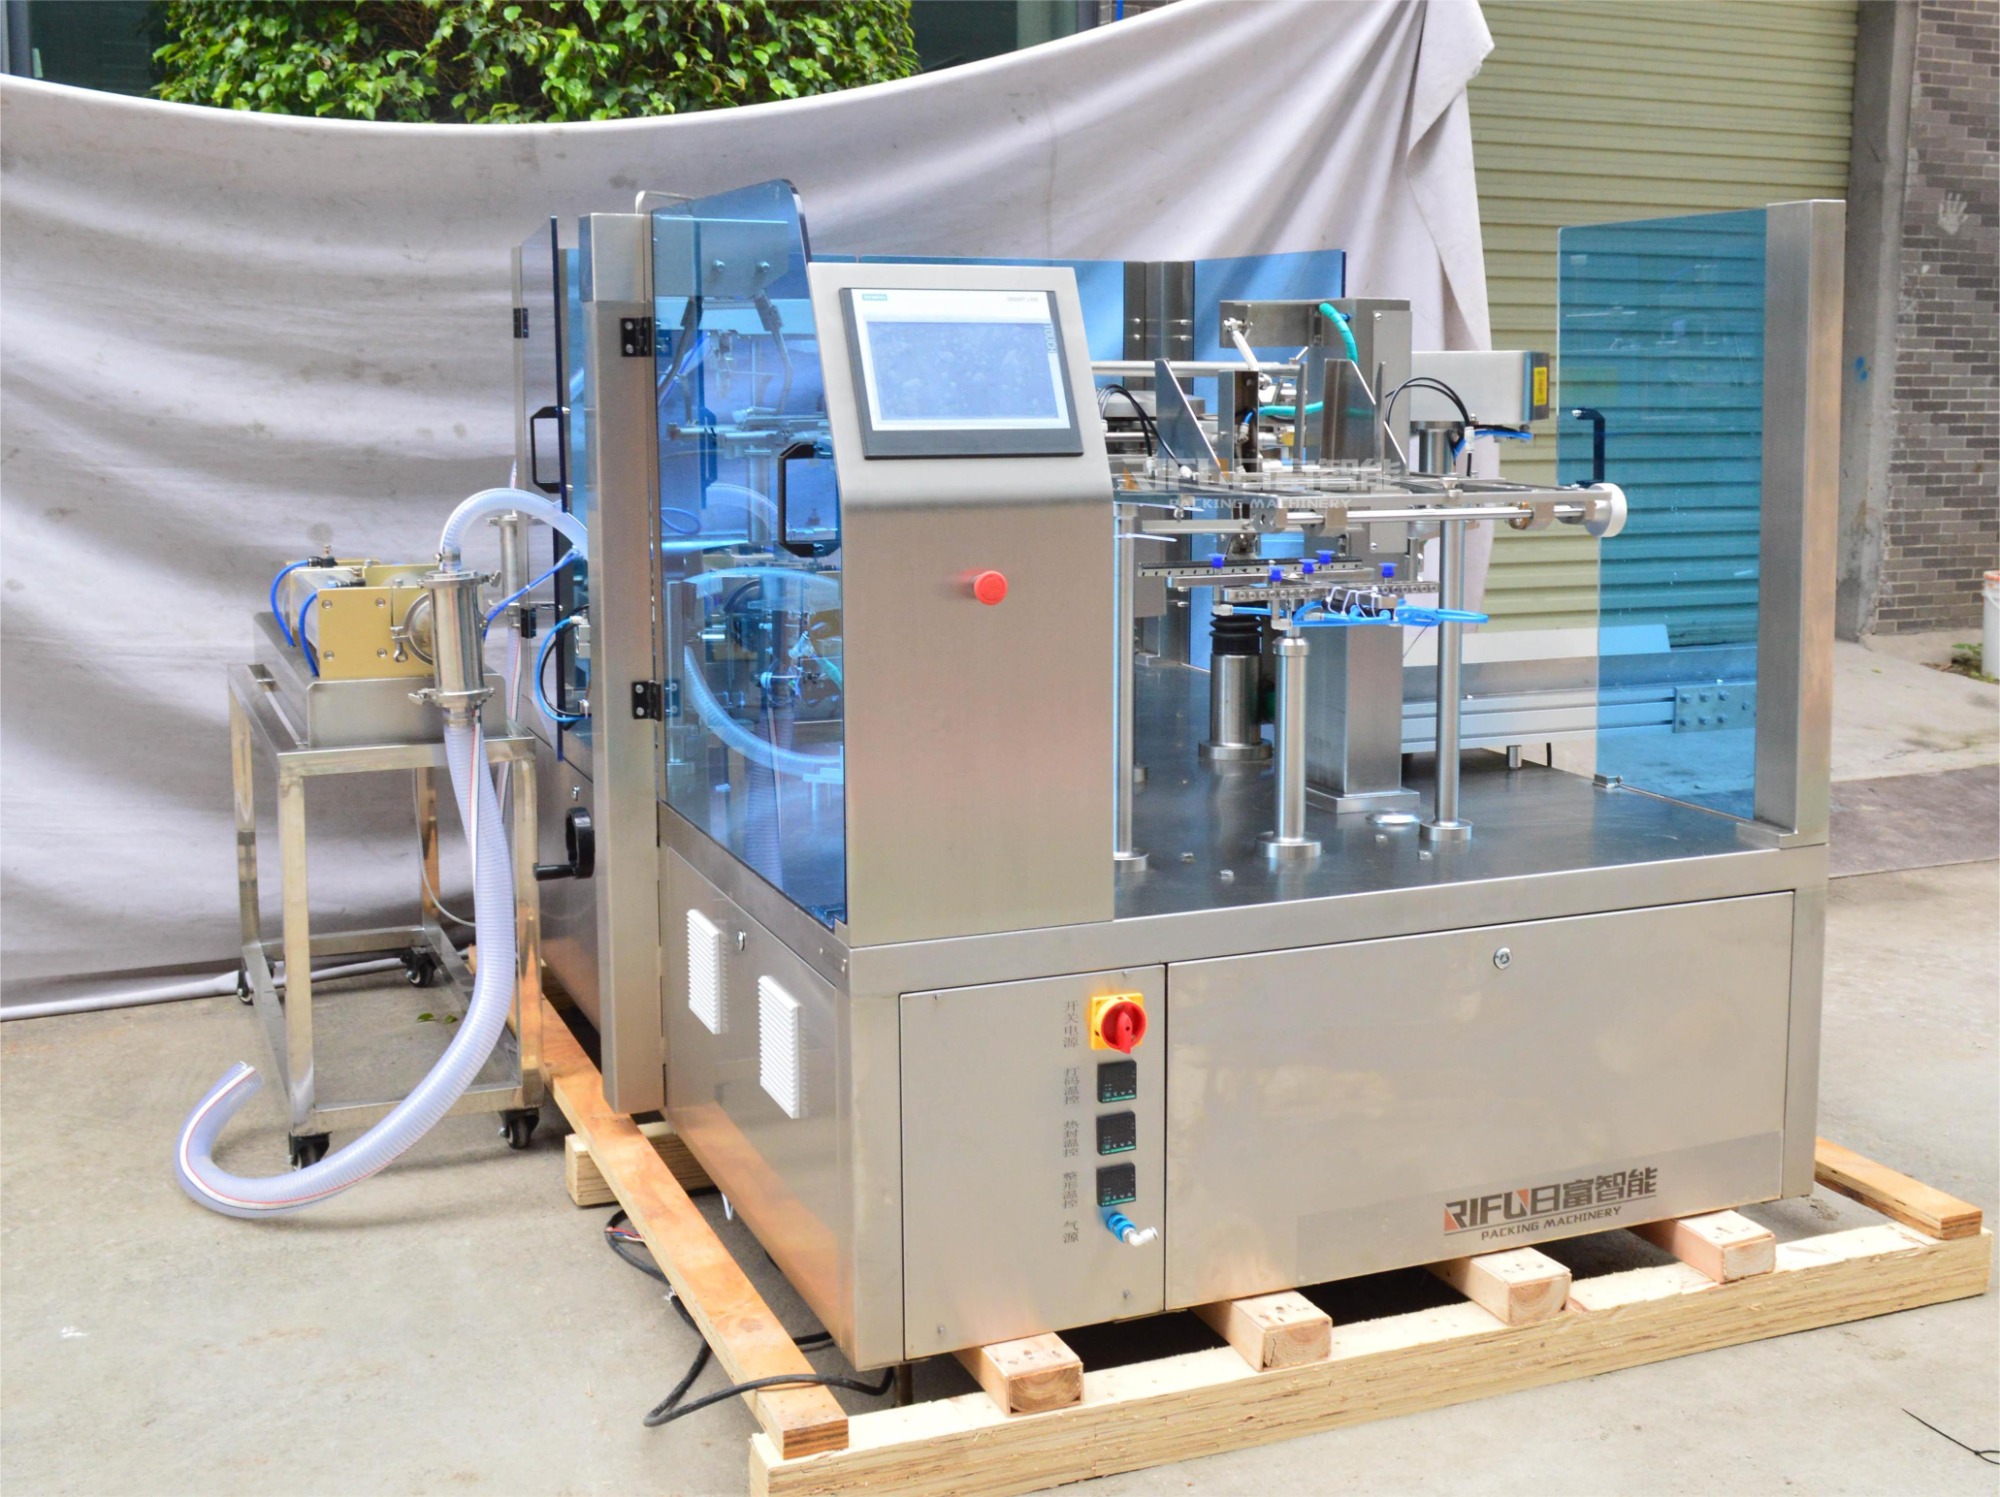 Fully automatic multifunctional quantitative rotary liquid pre-made bag packaging machine for detergent laundry shampoo